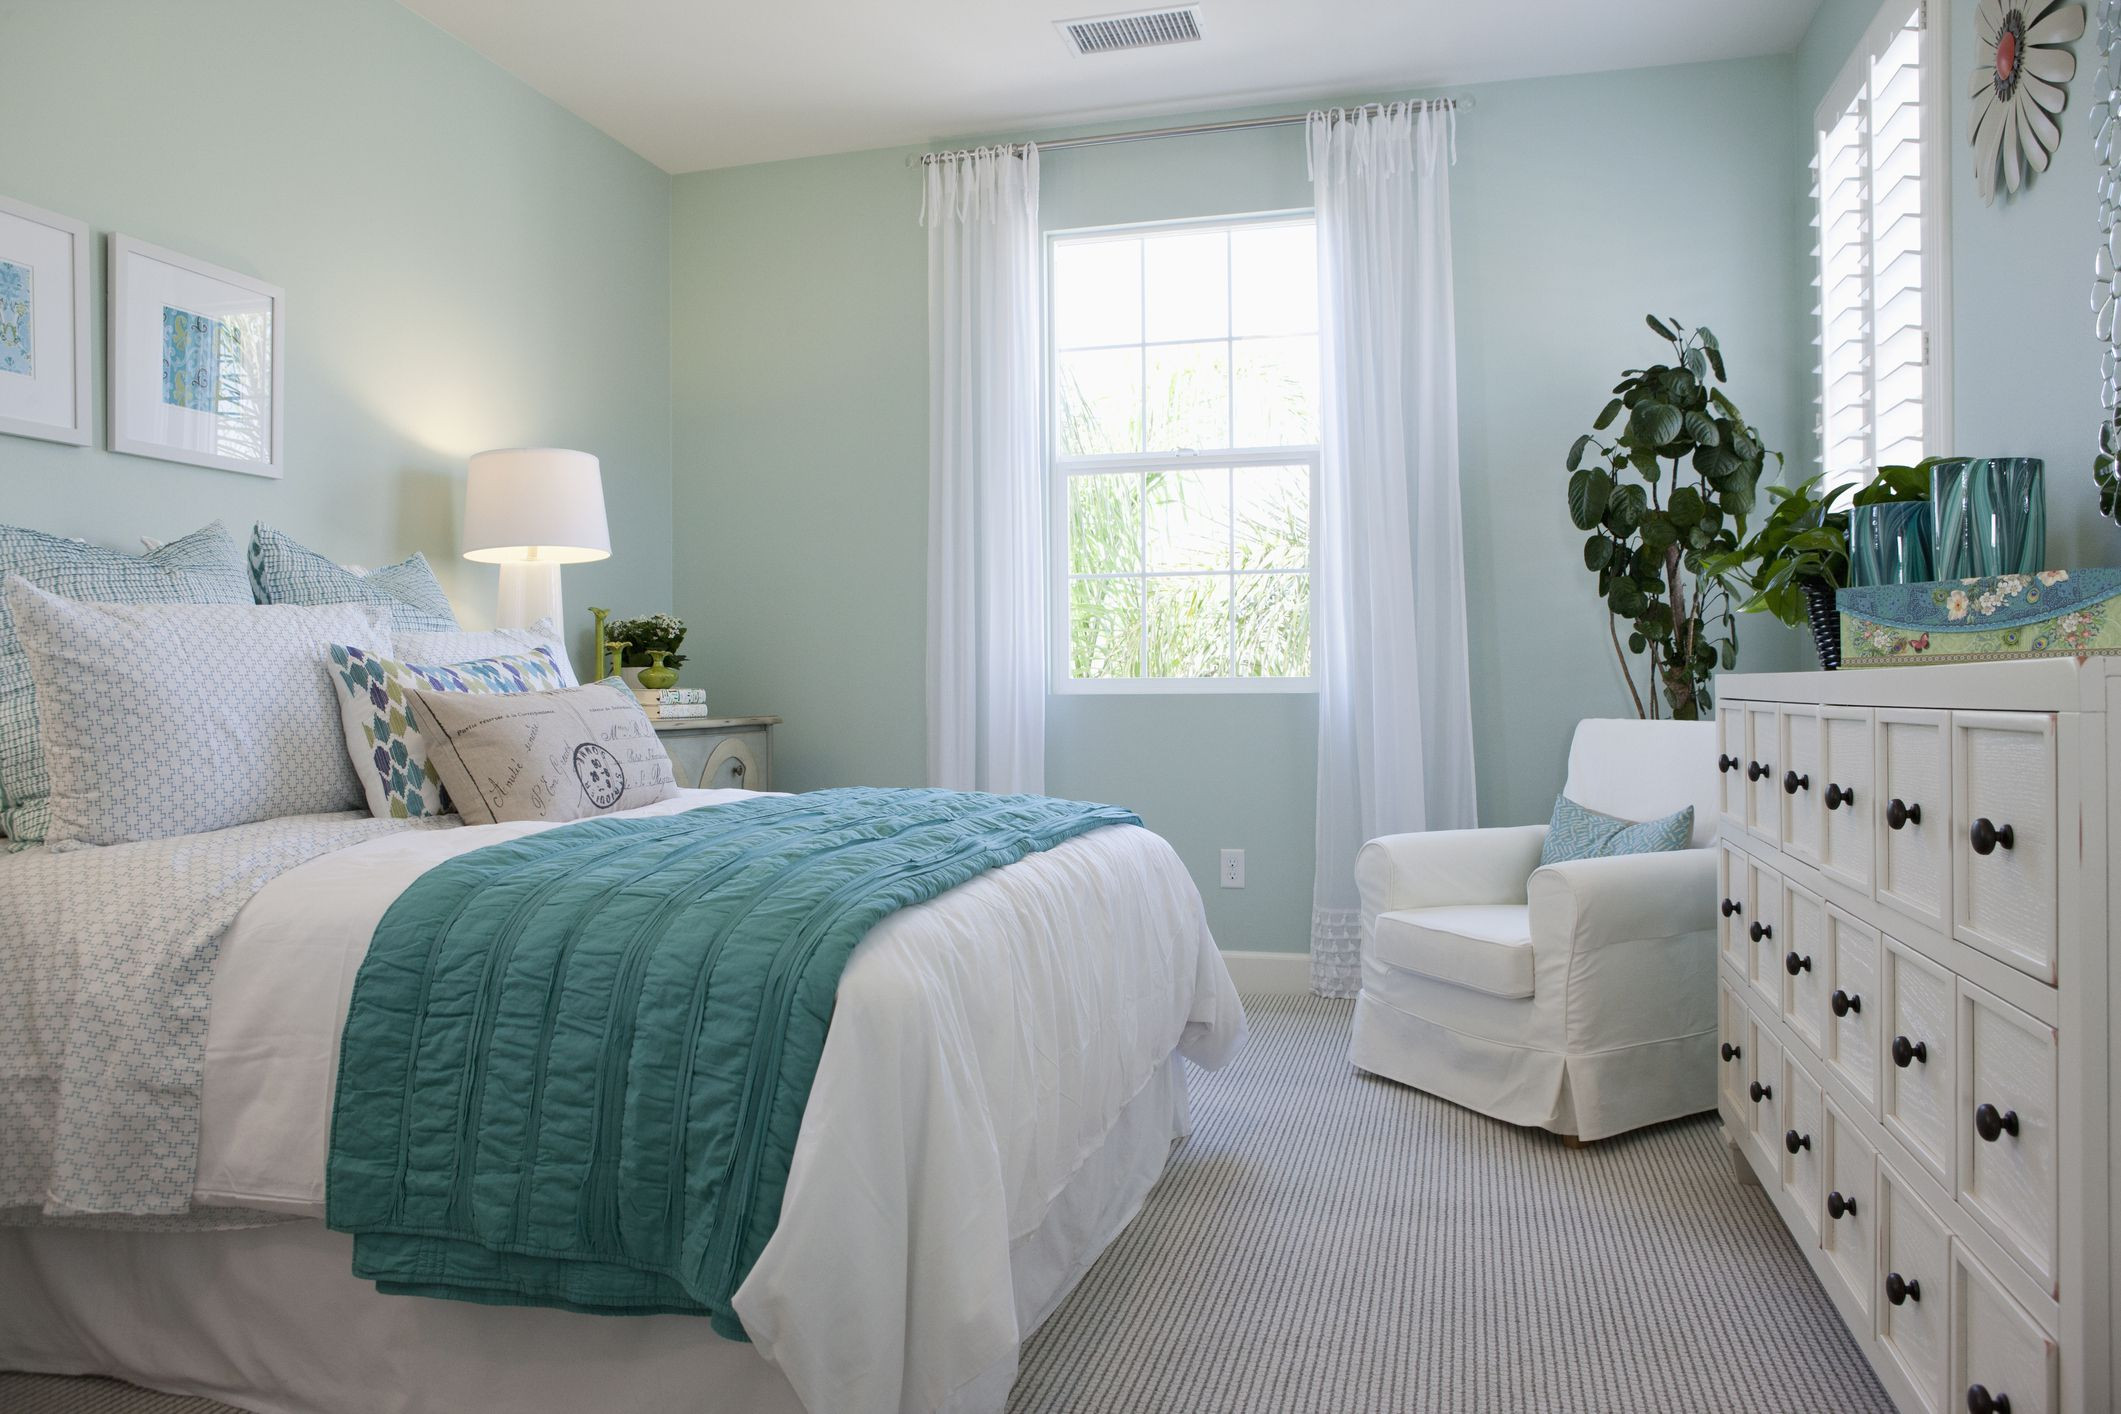 Painting For Bedroom
 How to Choose the Right Paint Colors for Your Bedroom